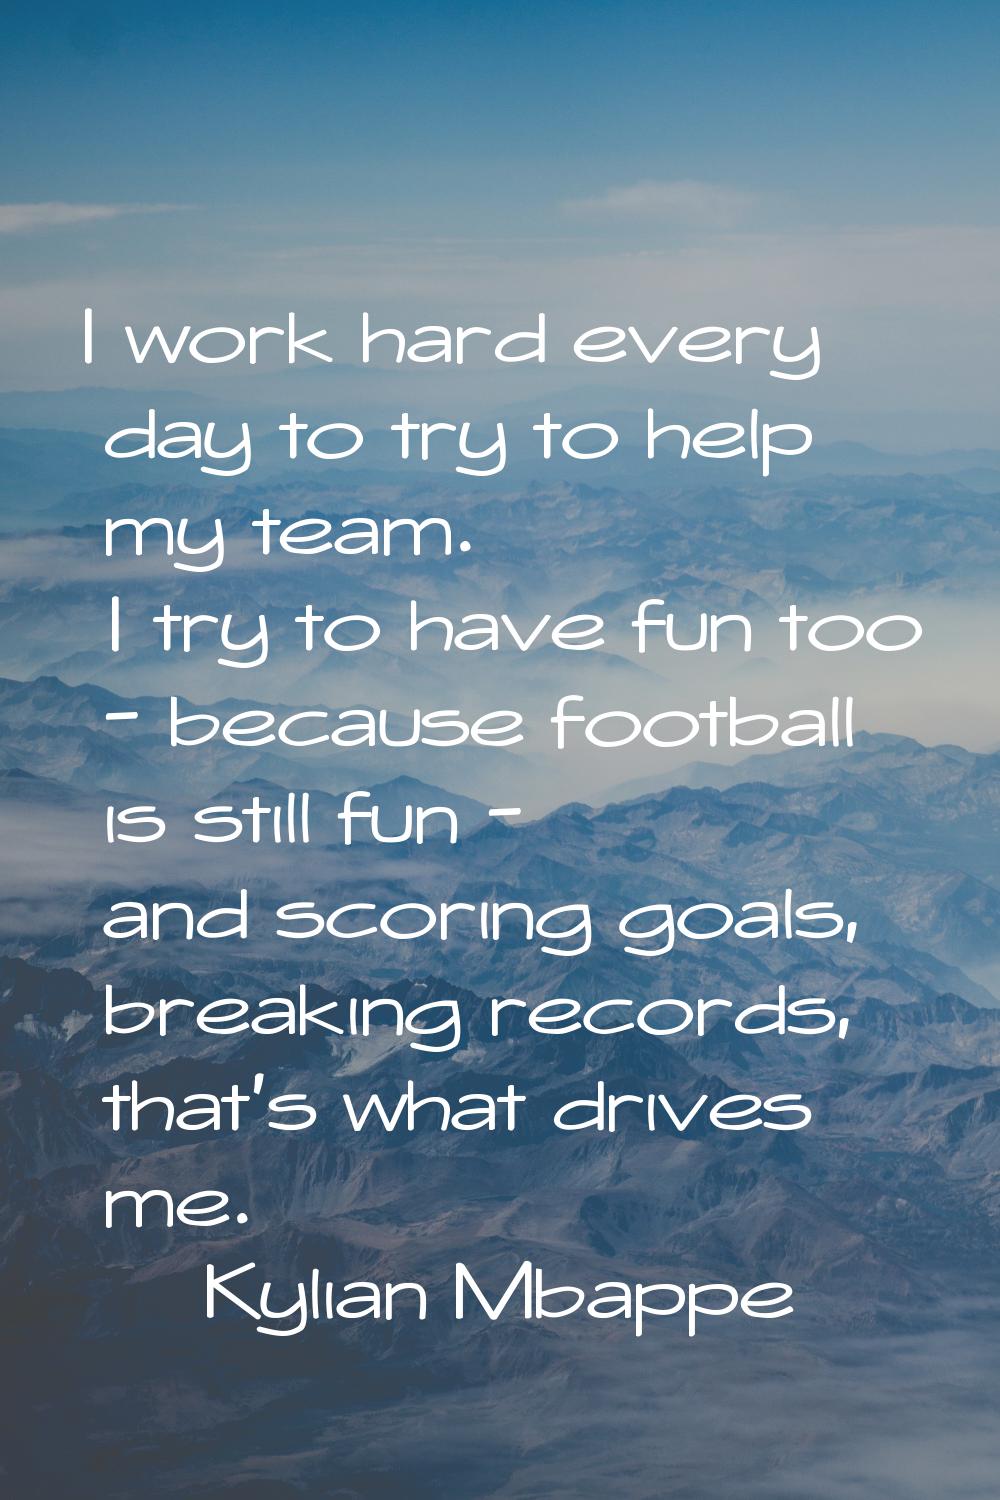 I work hard every day to try to help my team. I try to have fun too - because football is still fun